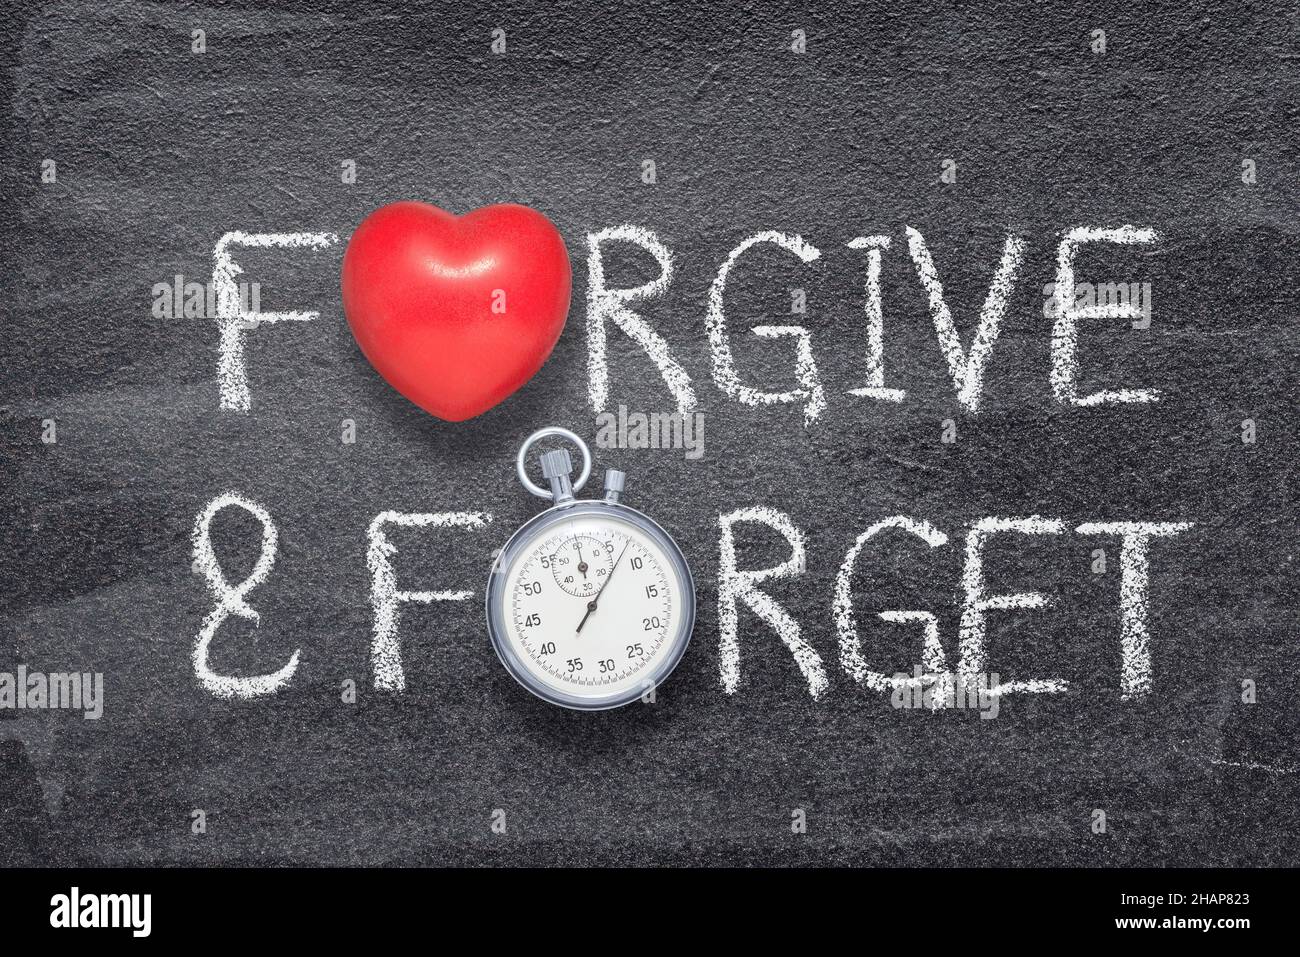 forgive and forget words written on chalkboard with vintage precise stopwatch and red heart symbol Stock Photo